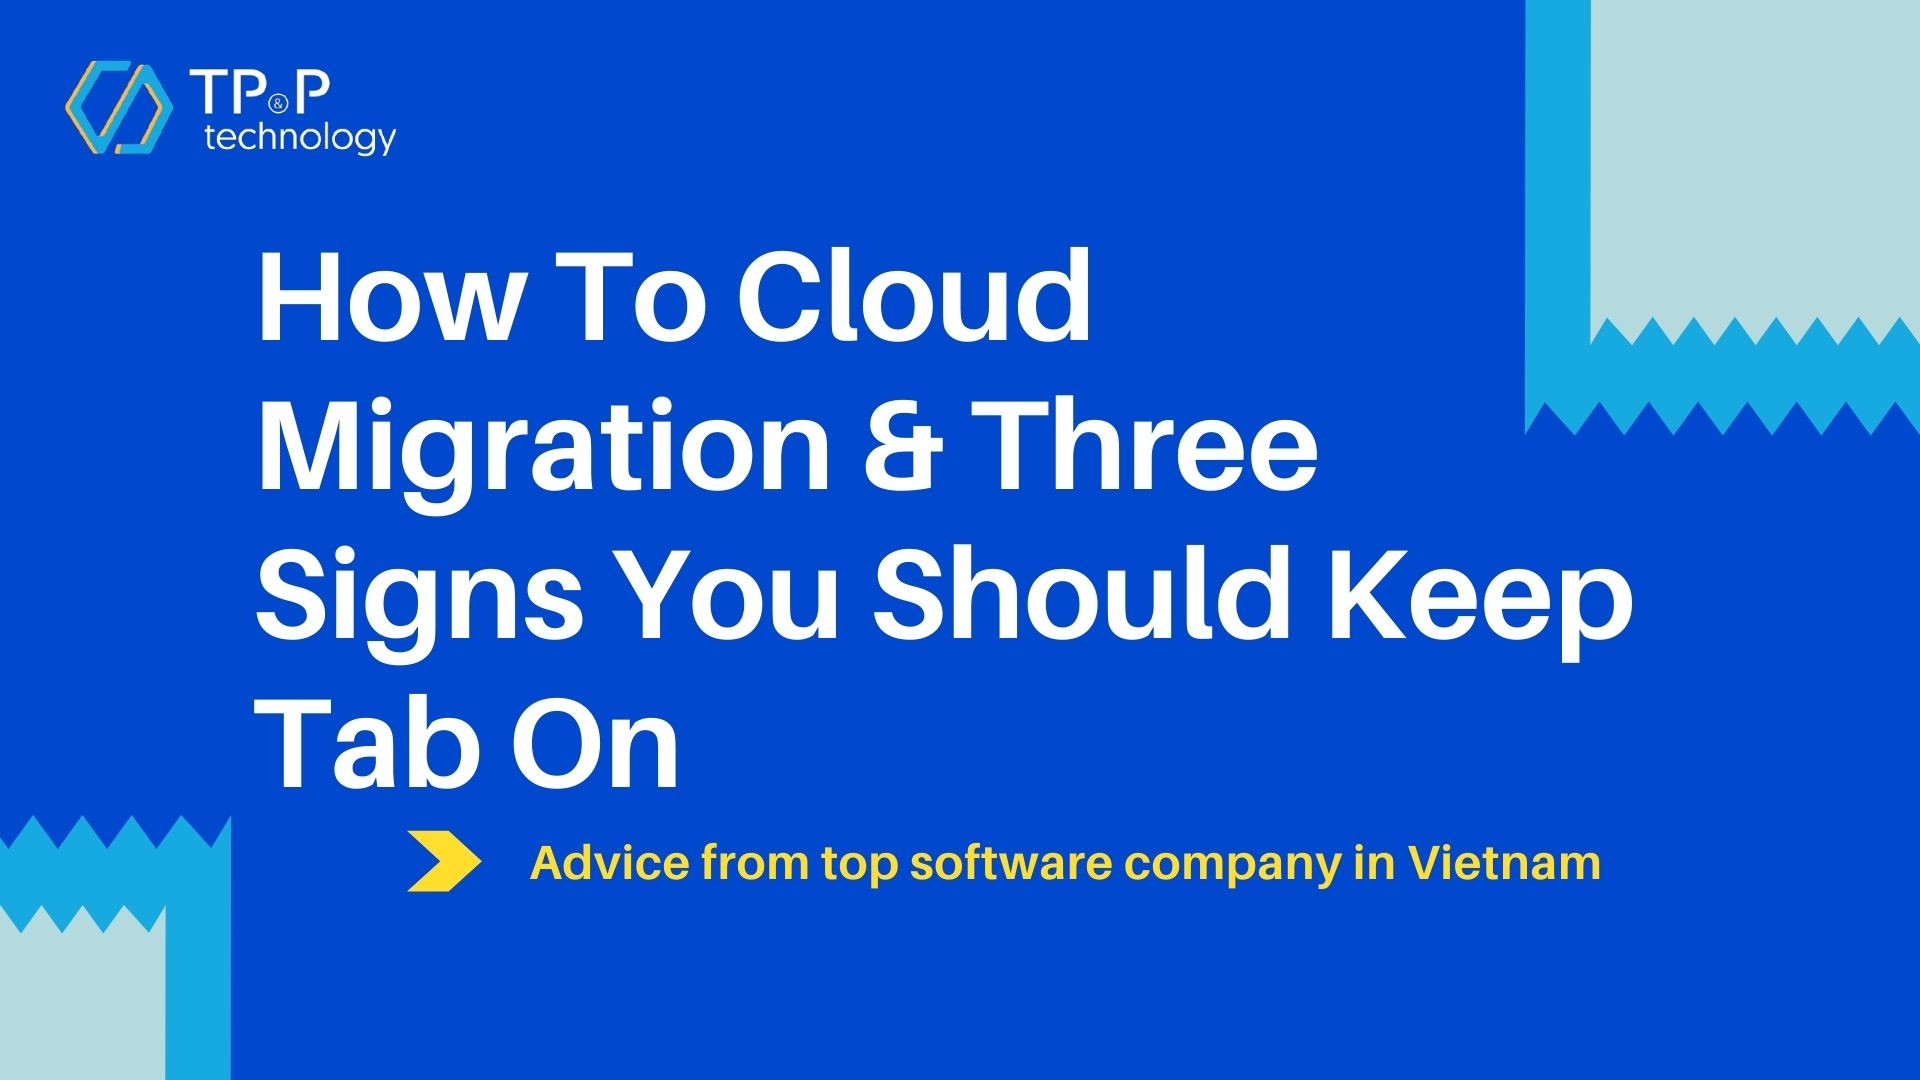 Cloud Migration: How To & Three Signs You Should Keep Tab On 